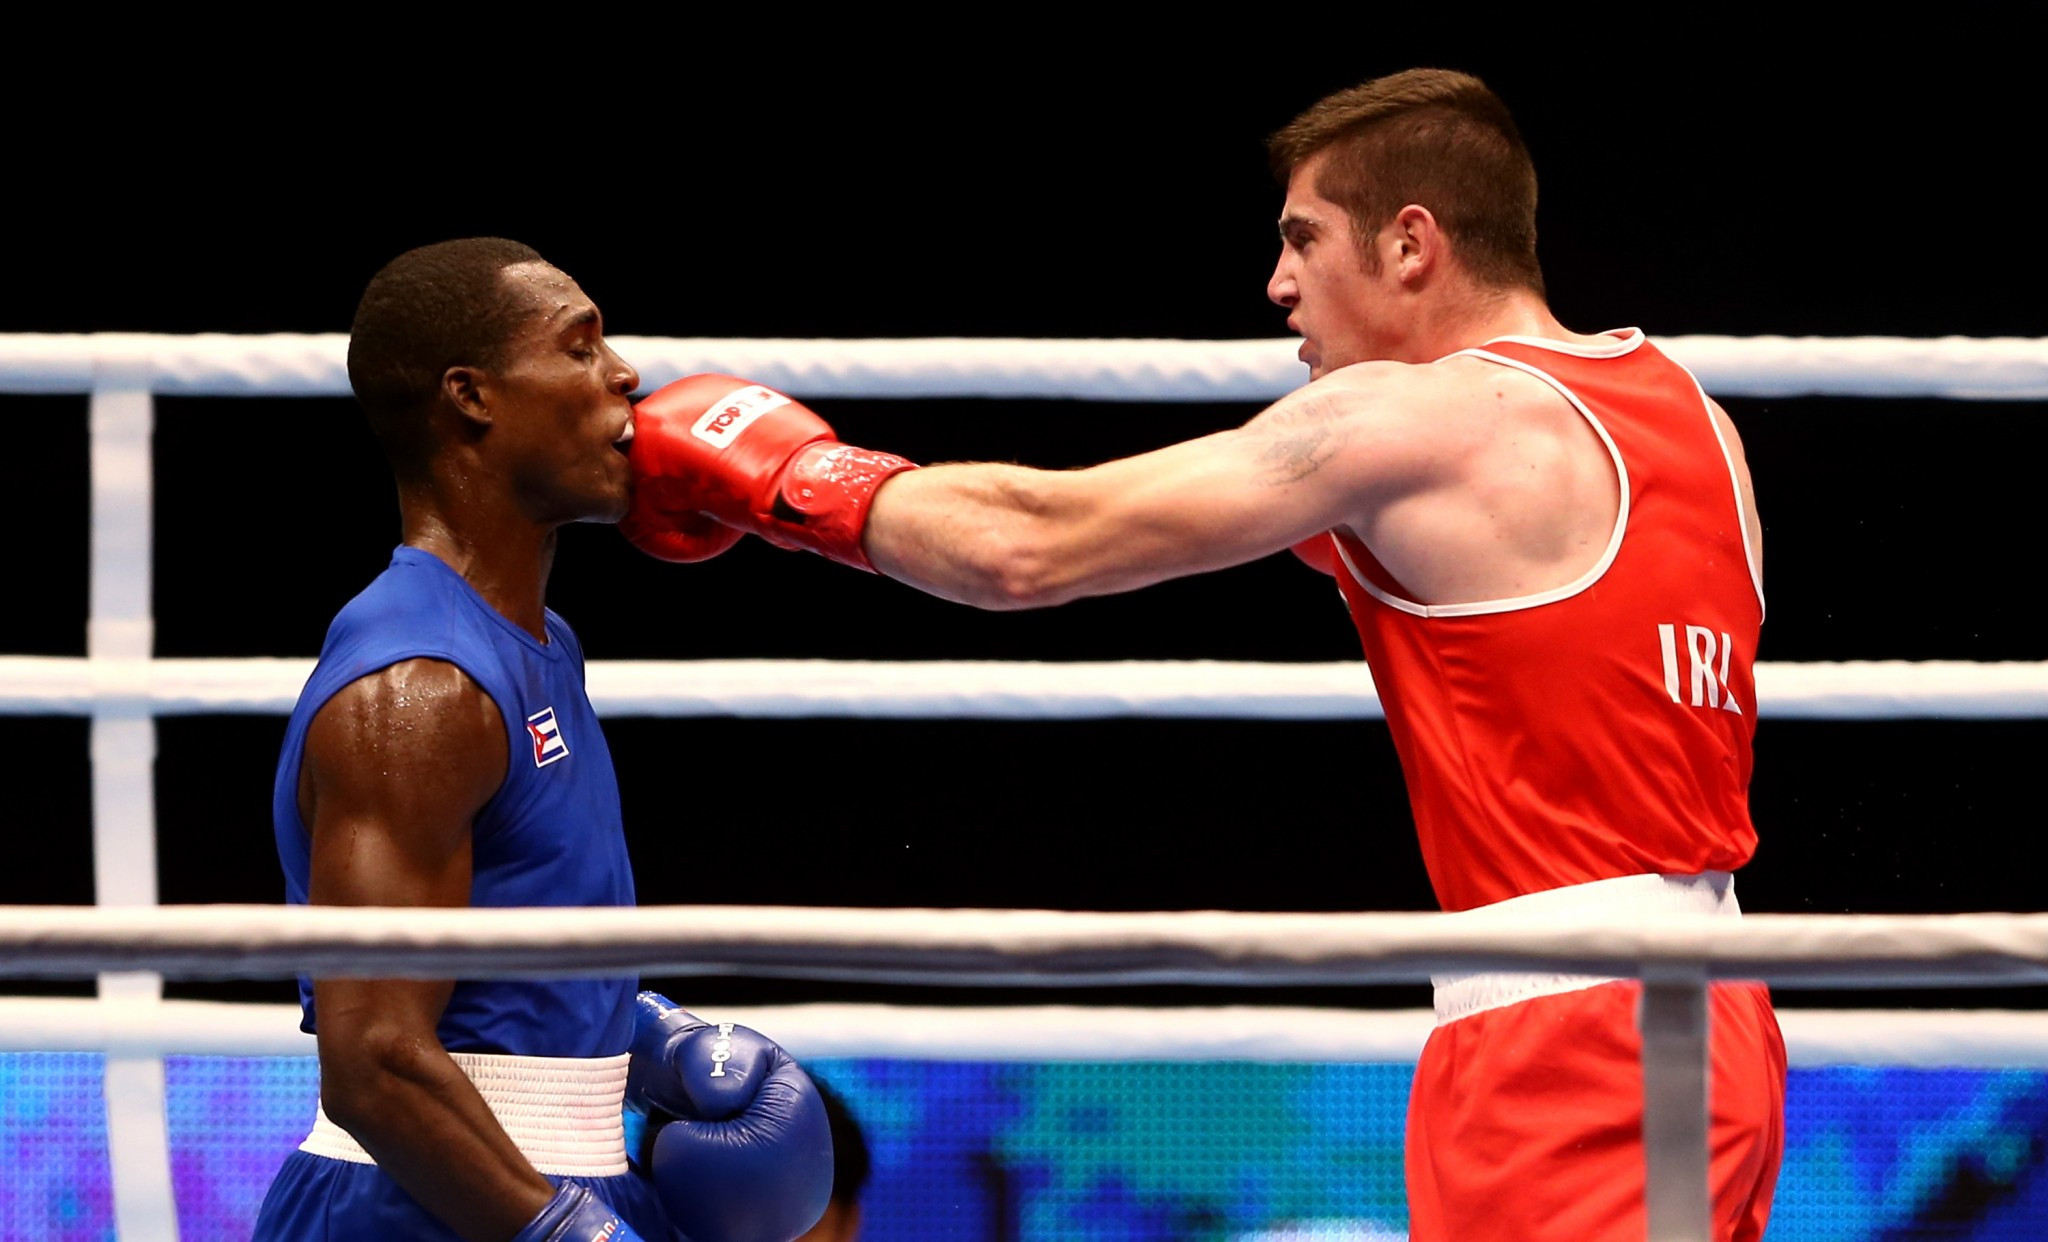 Ireland's Joe Ward hopes to be among the contenders for glory at the AIBA World Championships in Hamburg ©Getty Images 